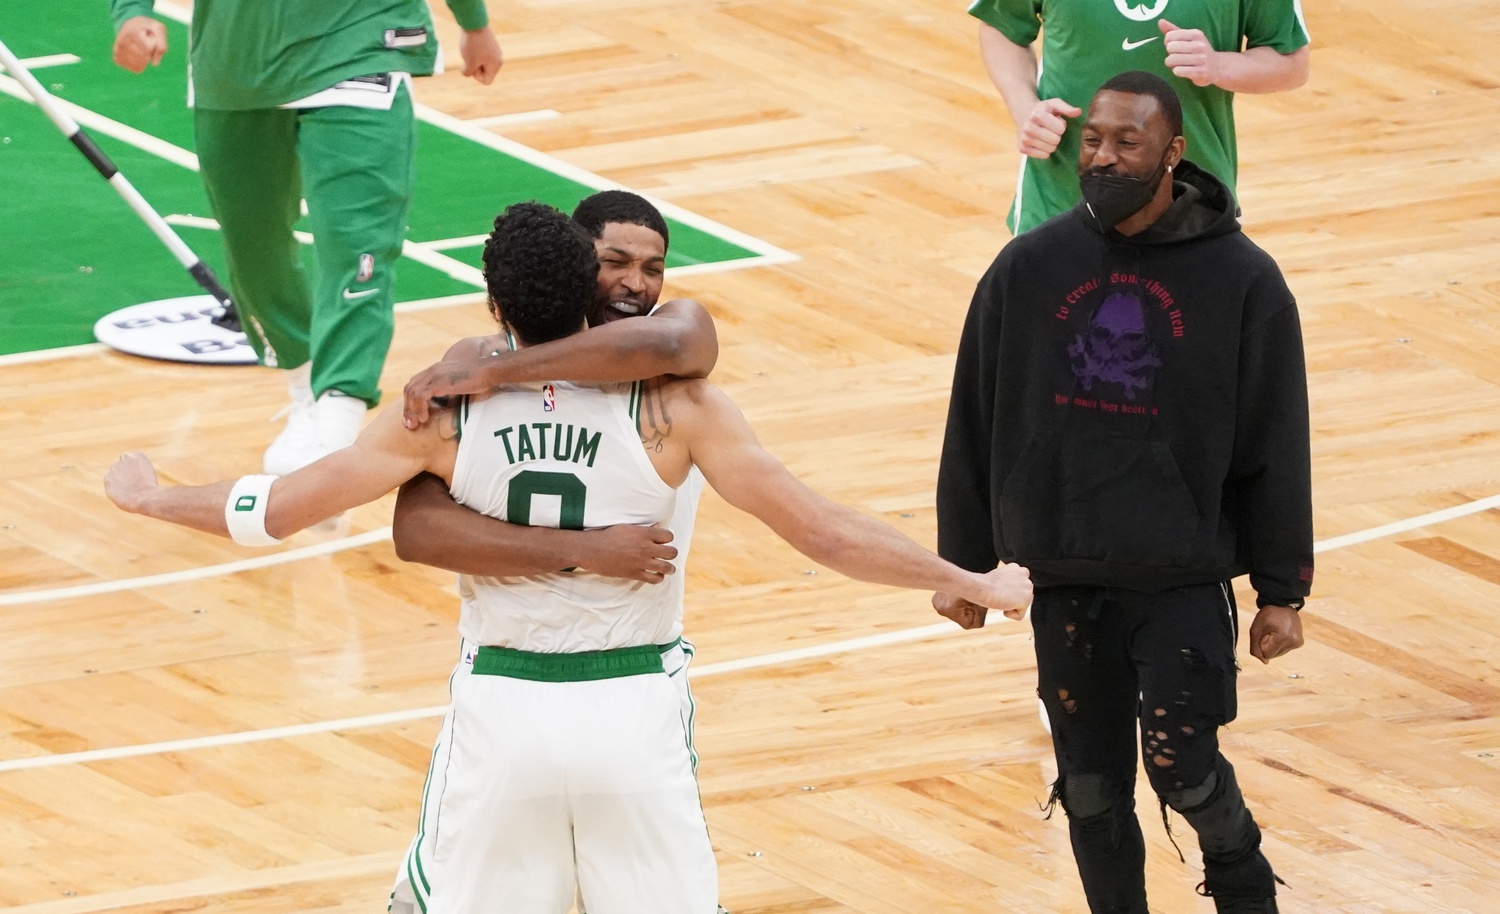 5 rational thoughts about the Celtics comeback and Tatum's milestone